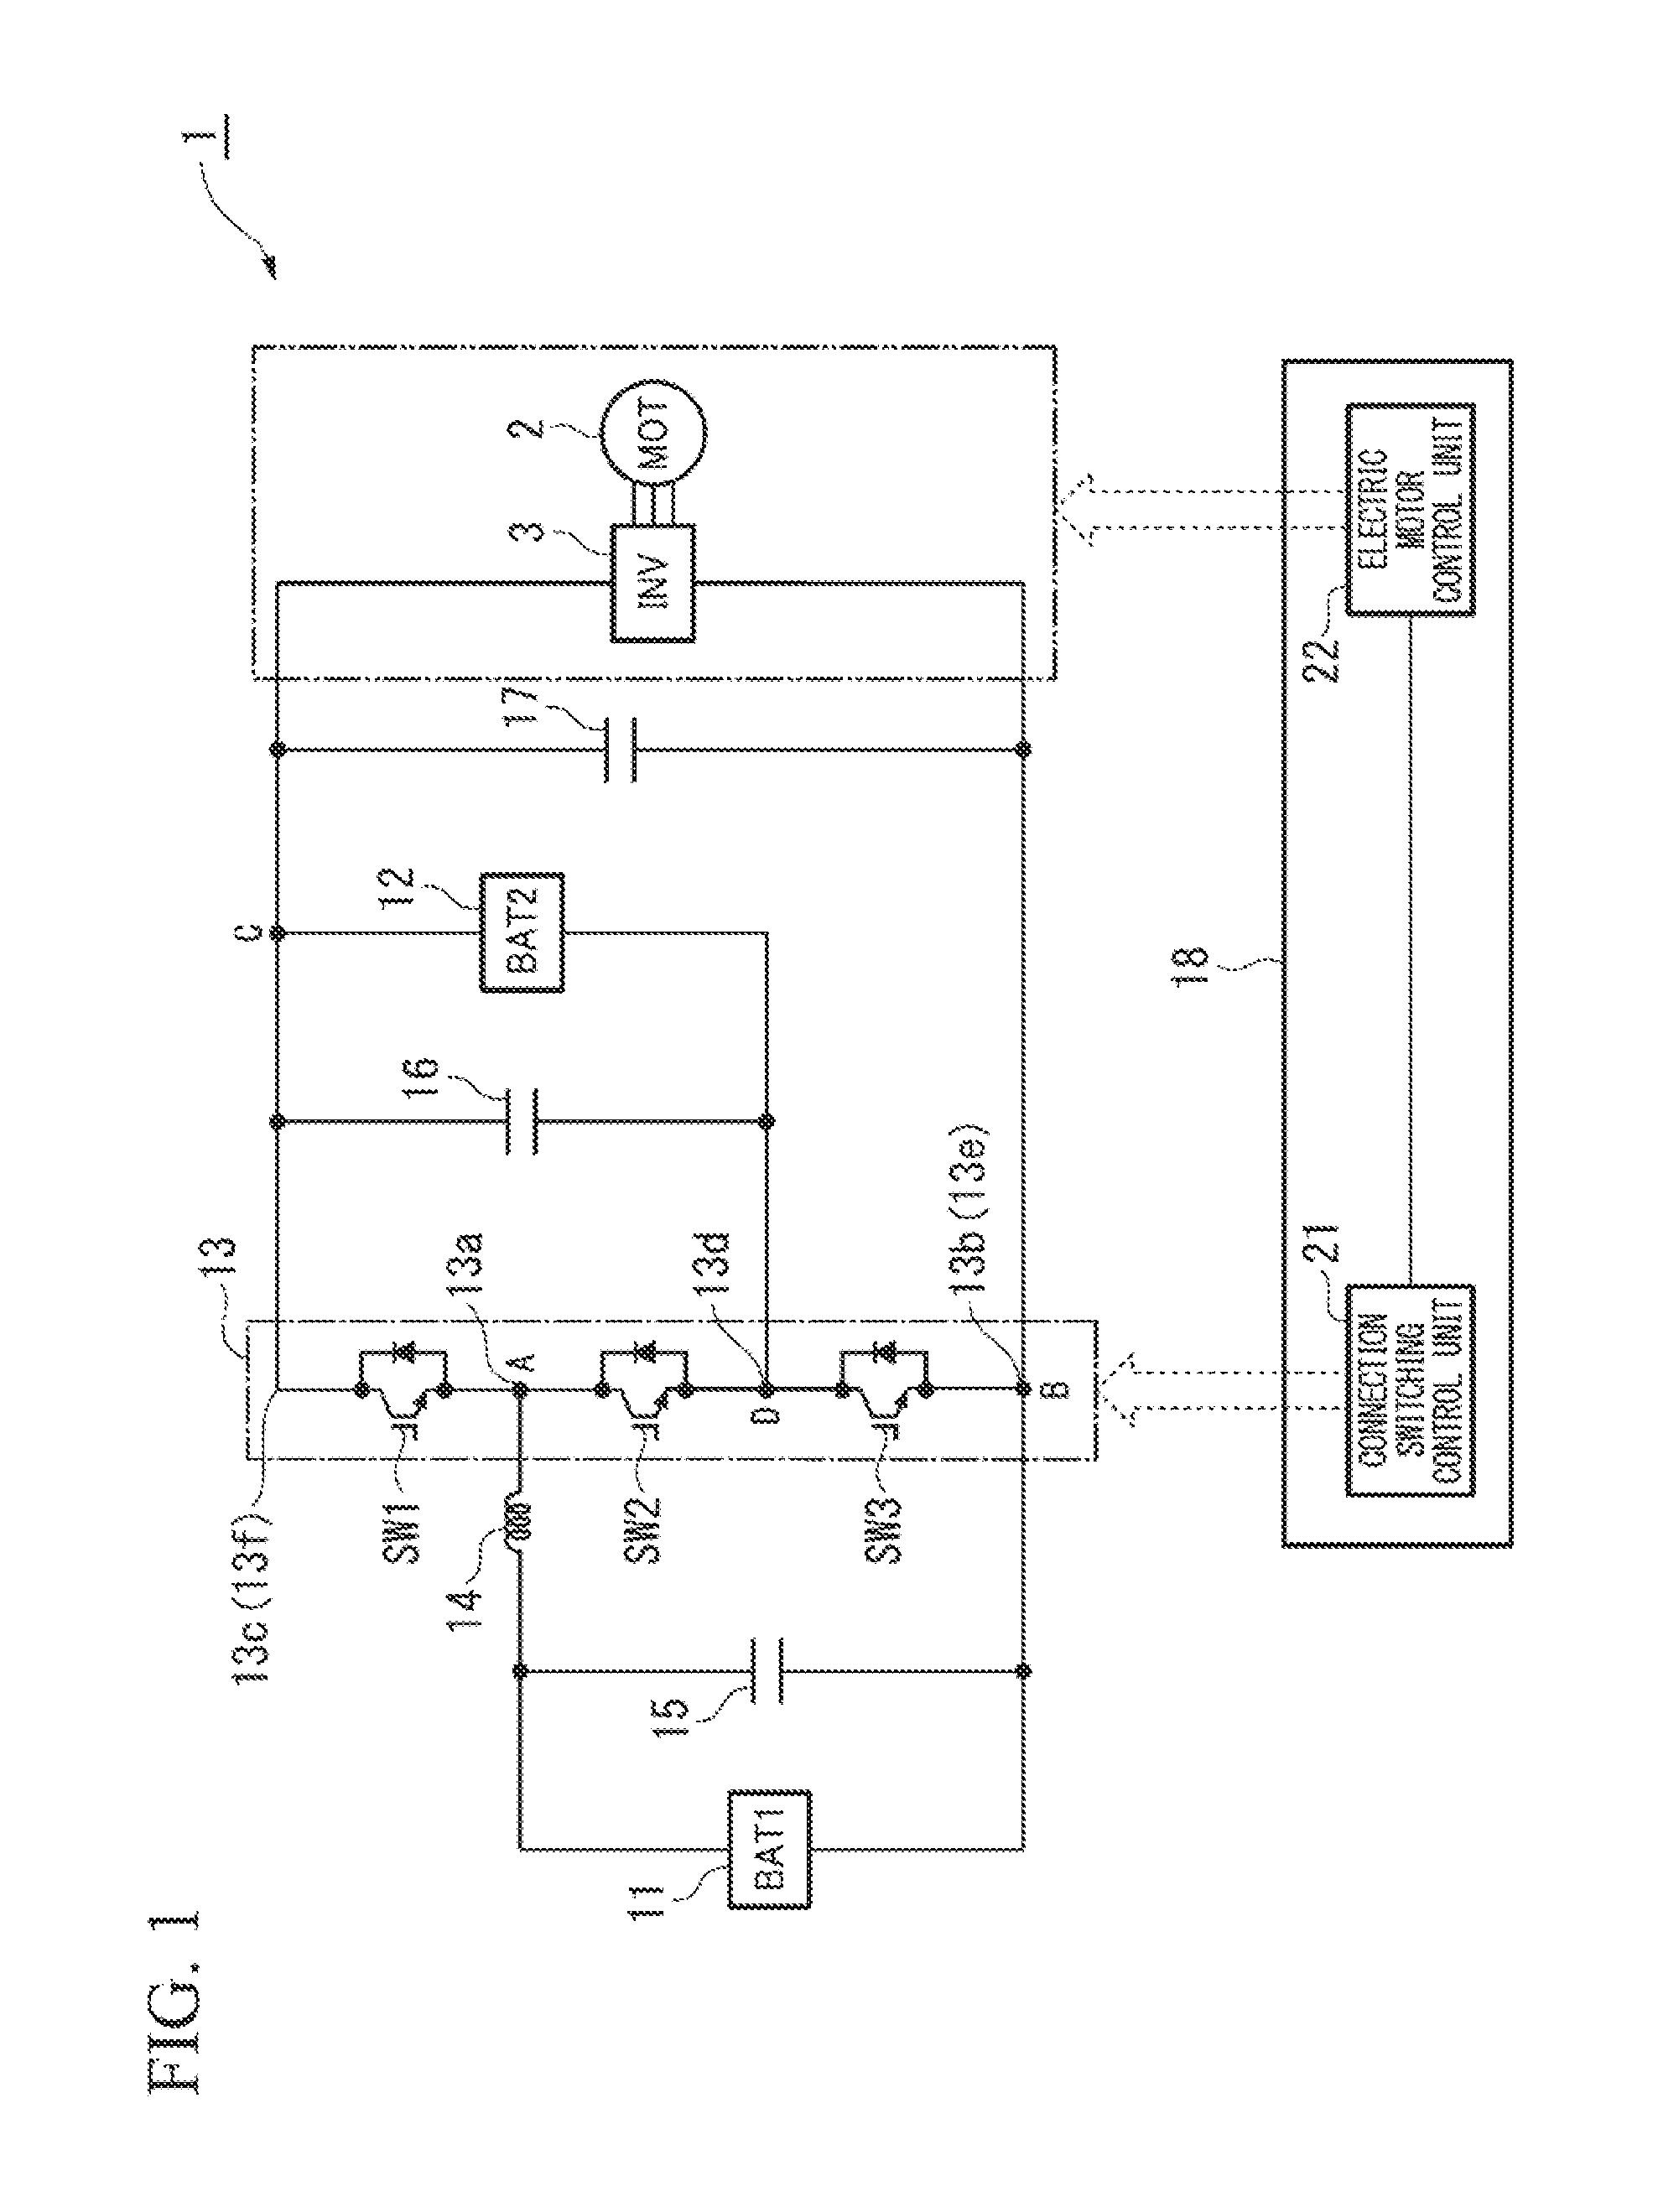 Electric power supply apparatus